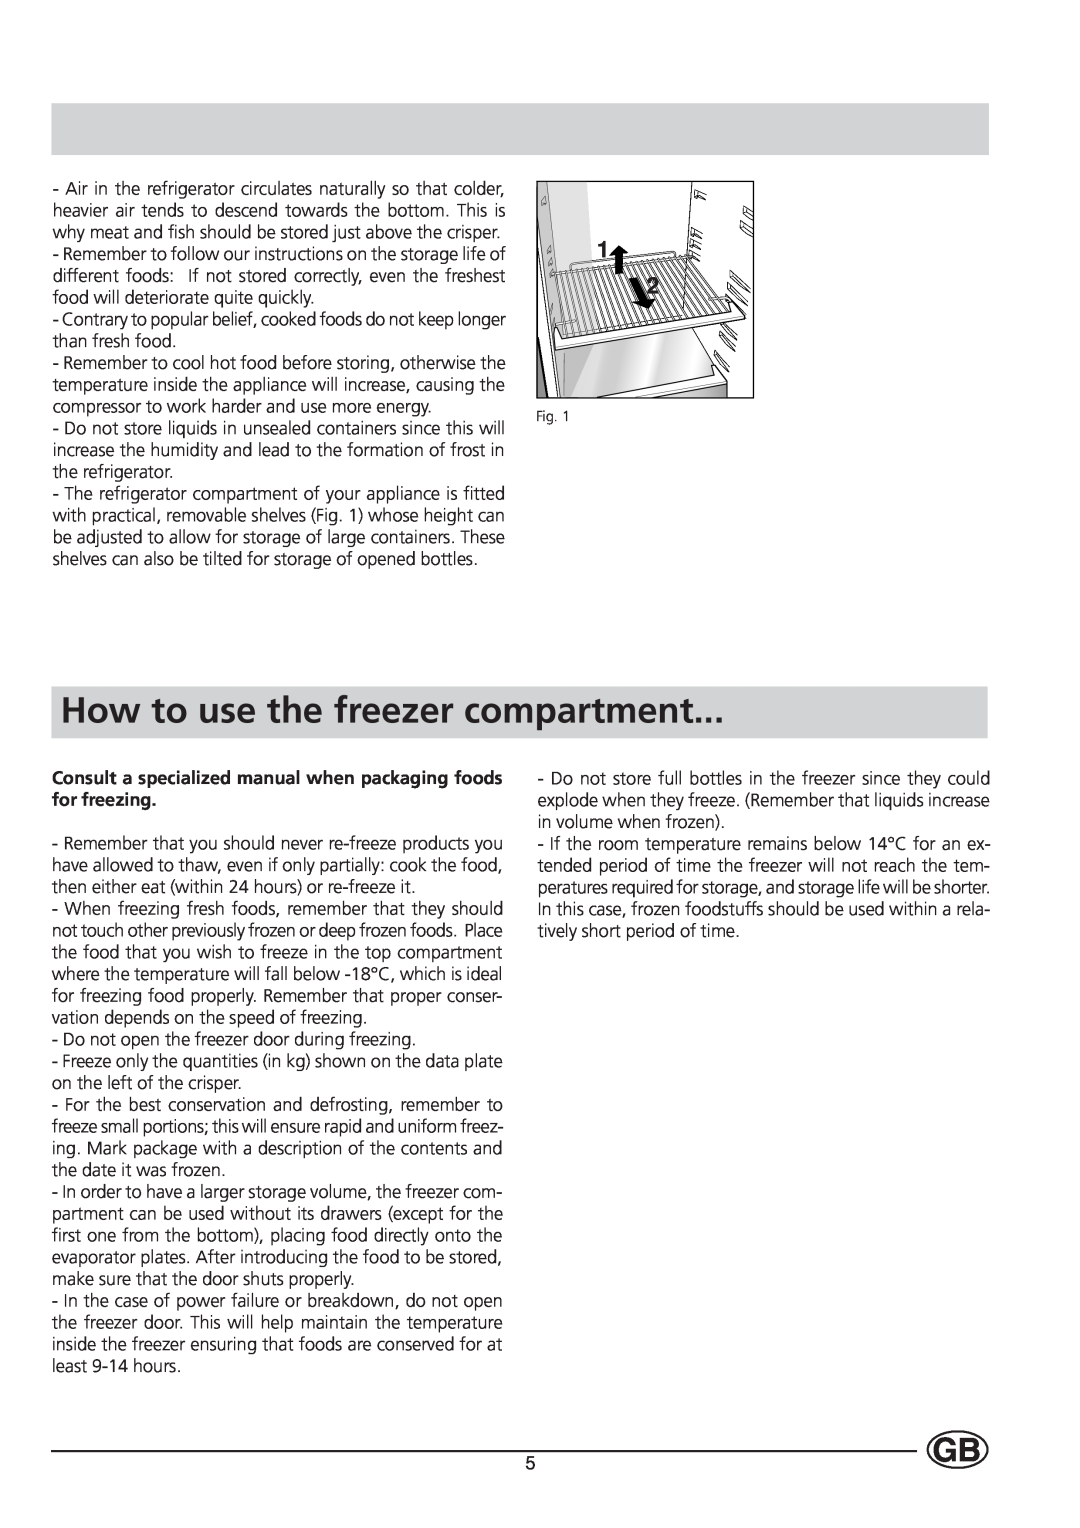 Indesit BA 139 S How to use the freezer compartment, Consult a specialized manual when packaging foods for freezing 